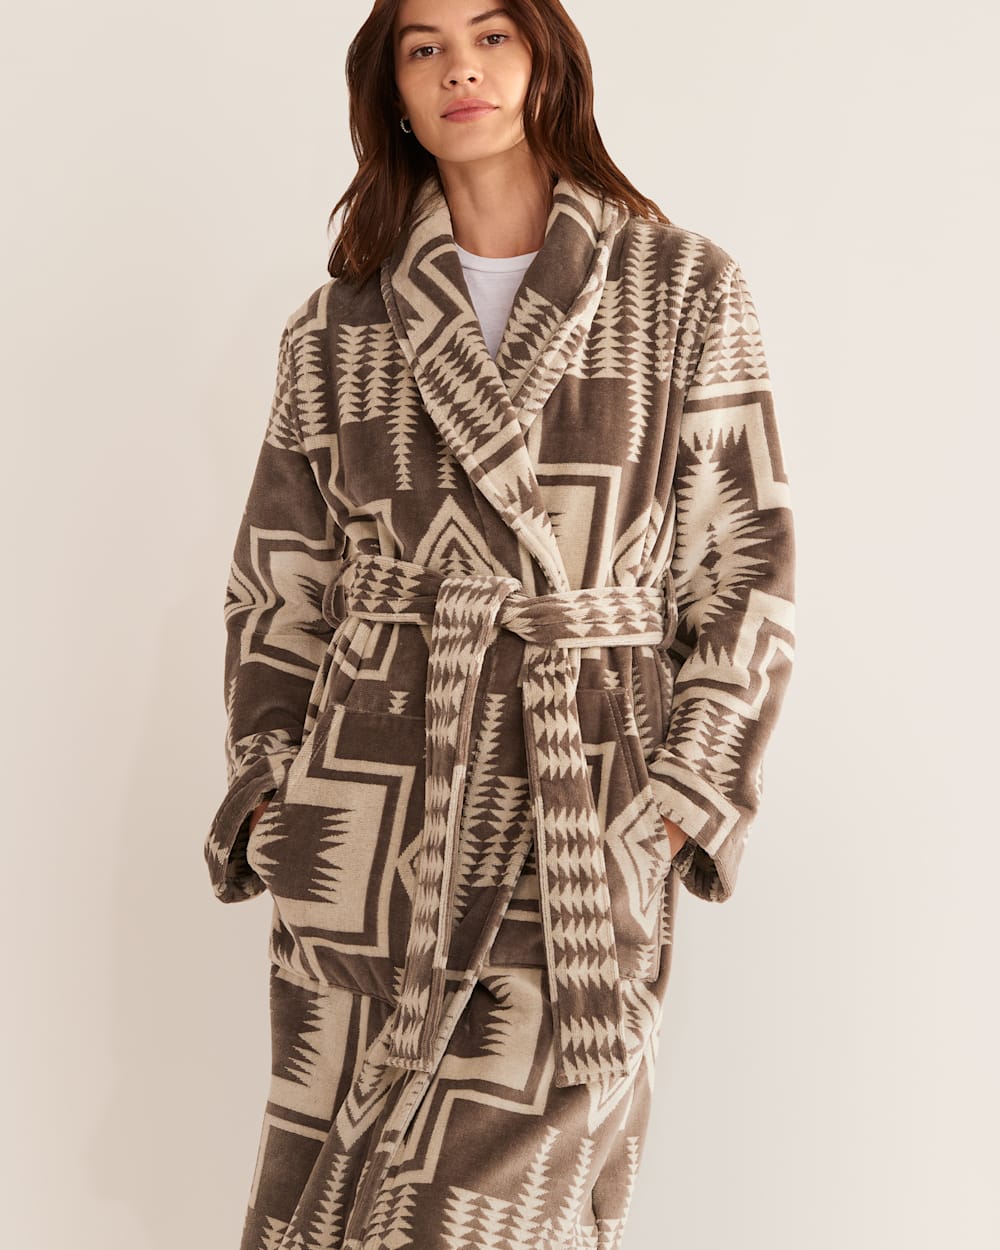 ALTERNATE VIEW OF WOMEN'S COTTON TERRY VELOUR ROBE IN HARDING GREY image number 4